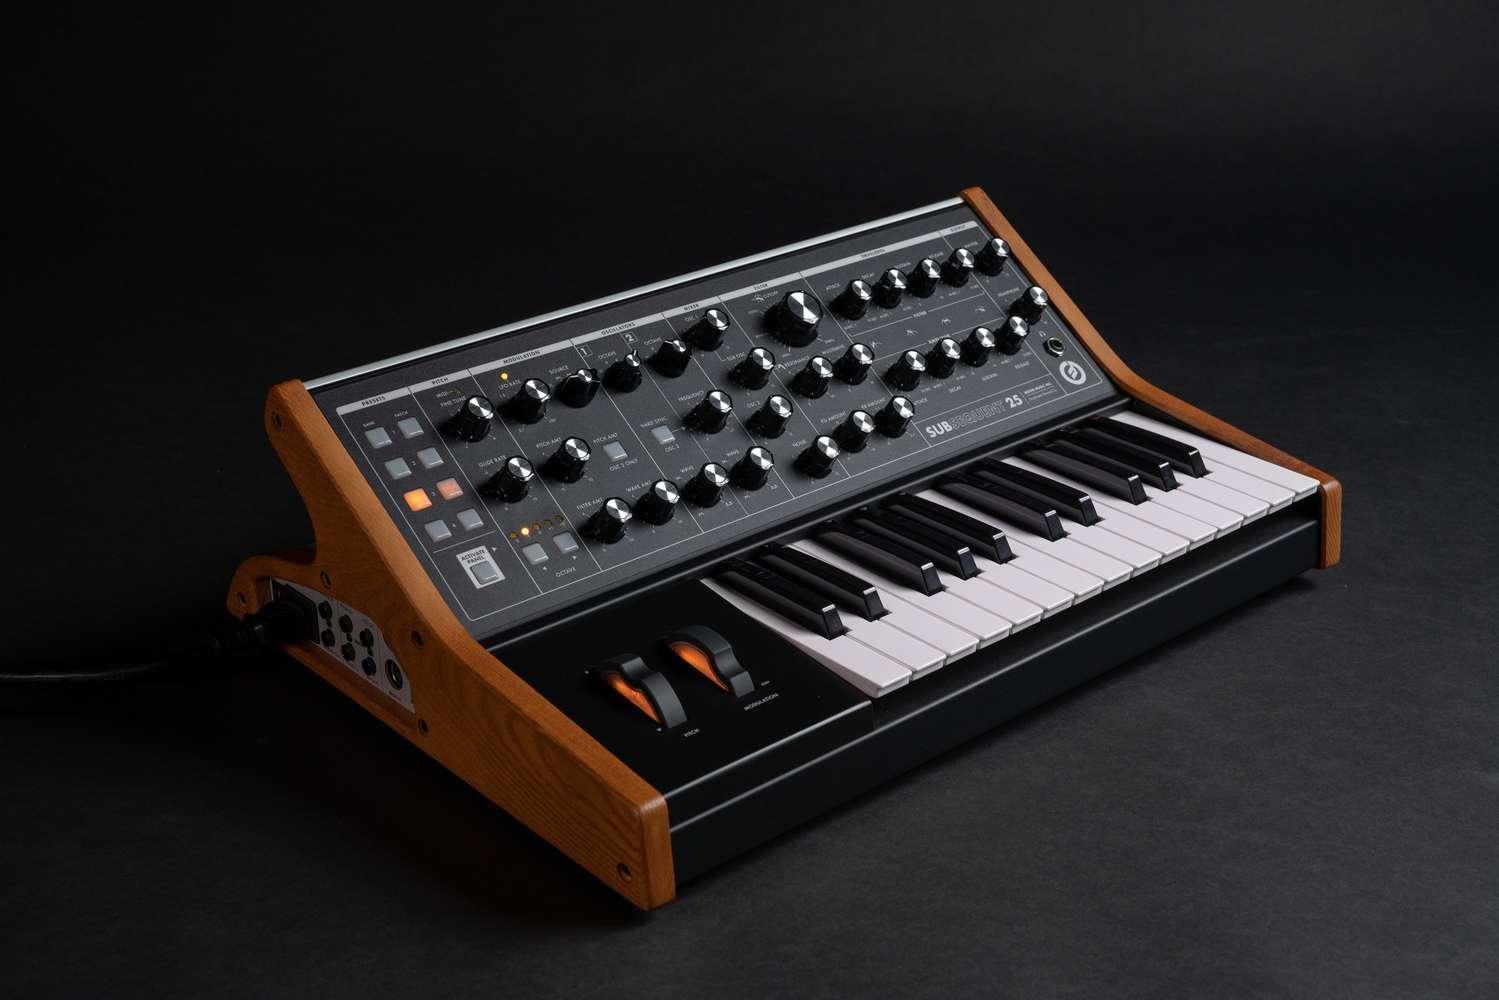 Subsequent 25 | Moog